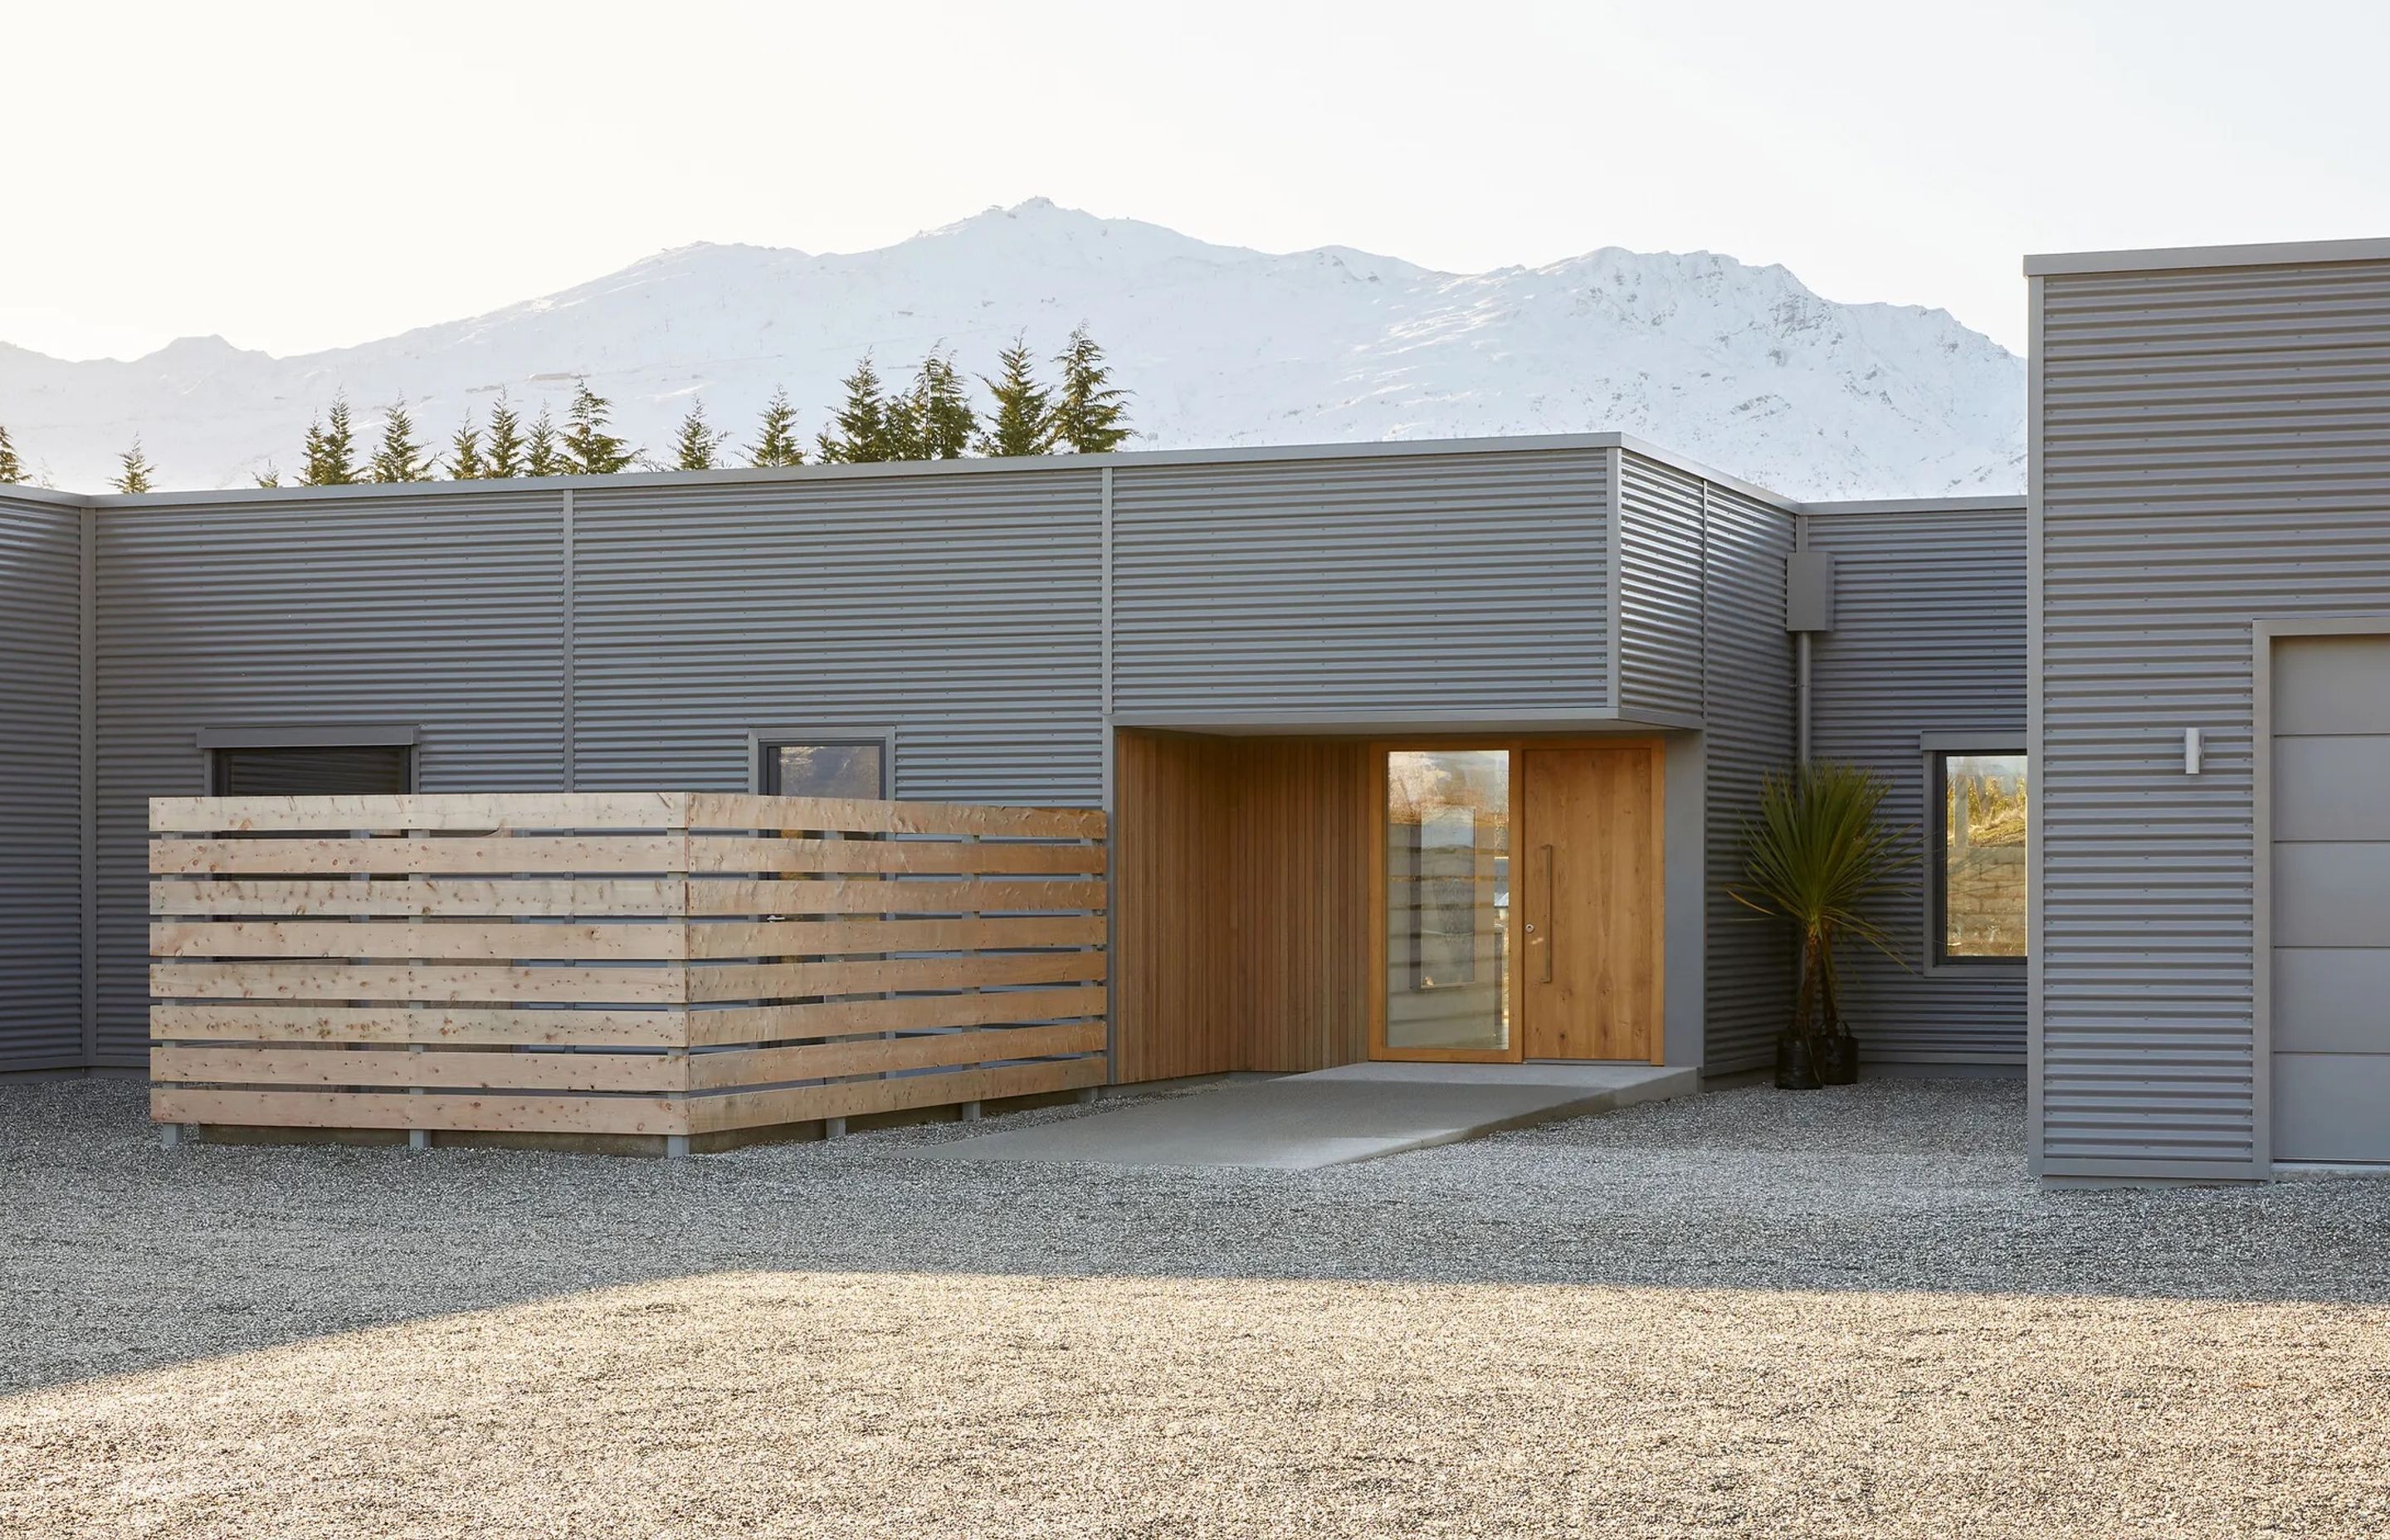 Hardscaping can enhance kerb appeal when done well, demonstrated here with the impressive Passive House in Queenstown.